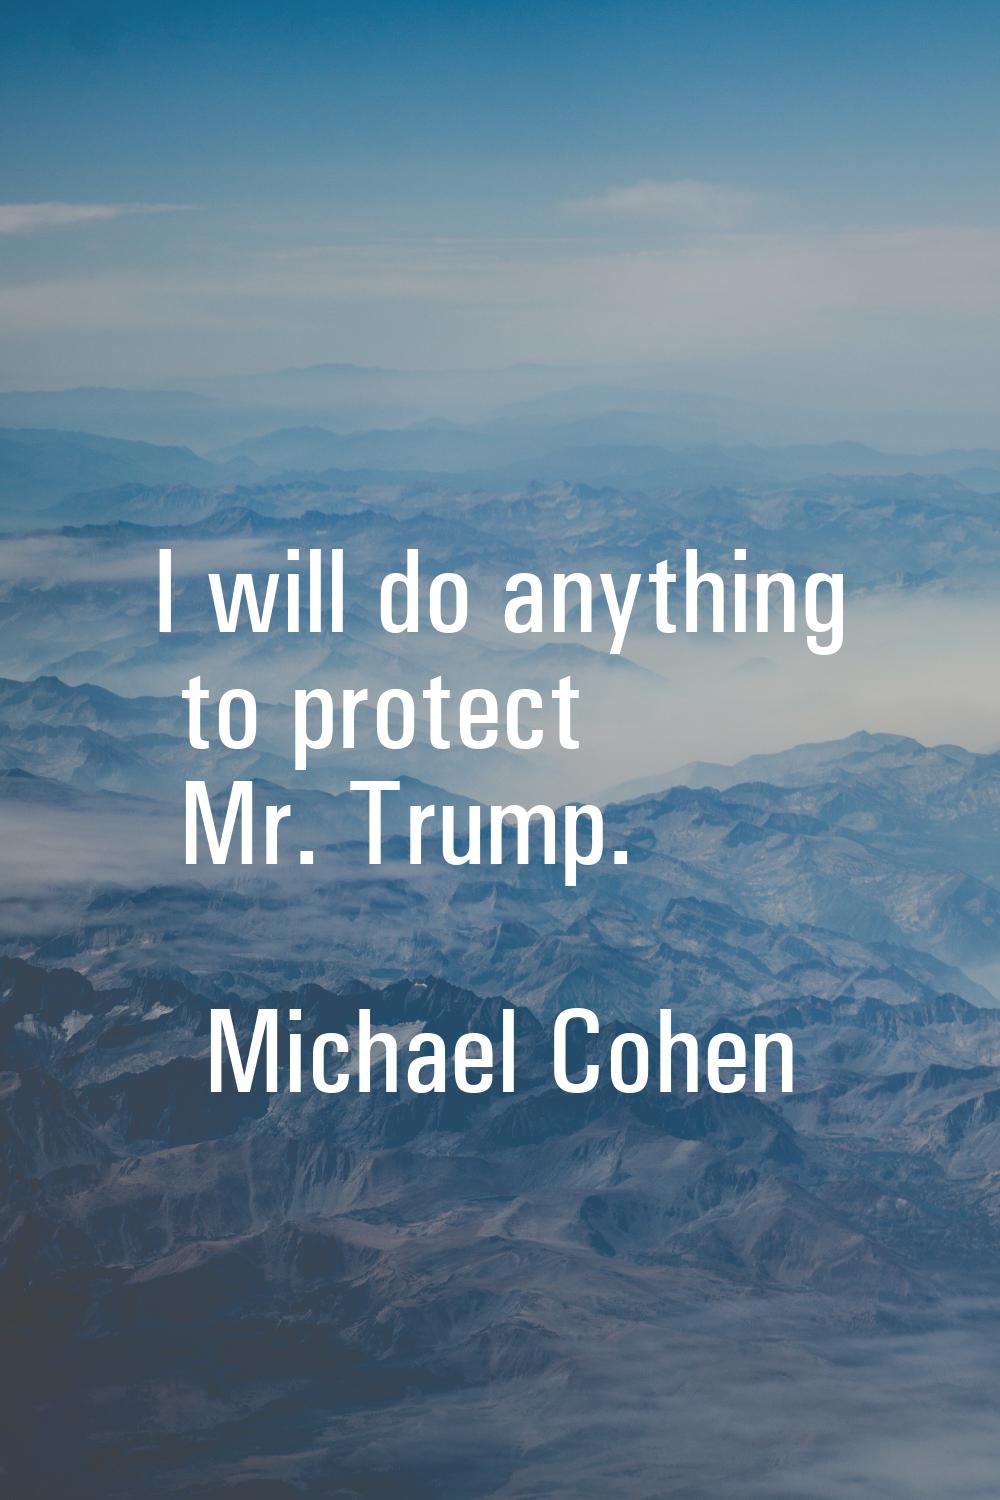 I will do anything to protect Mr. Trump.